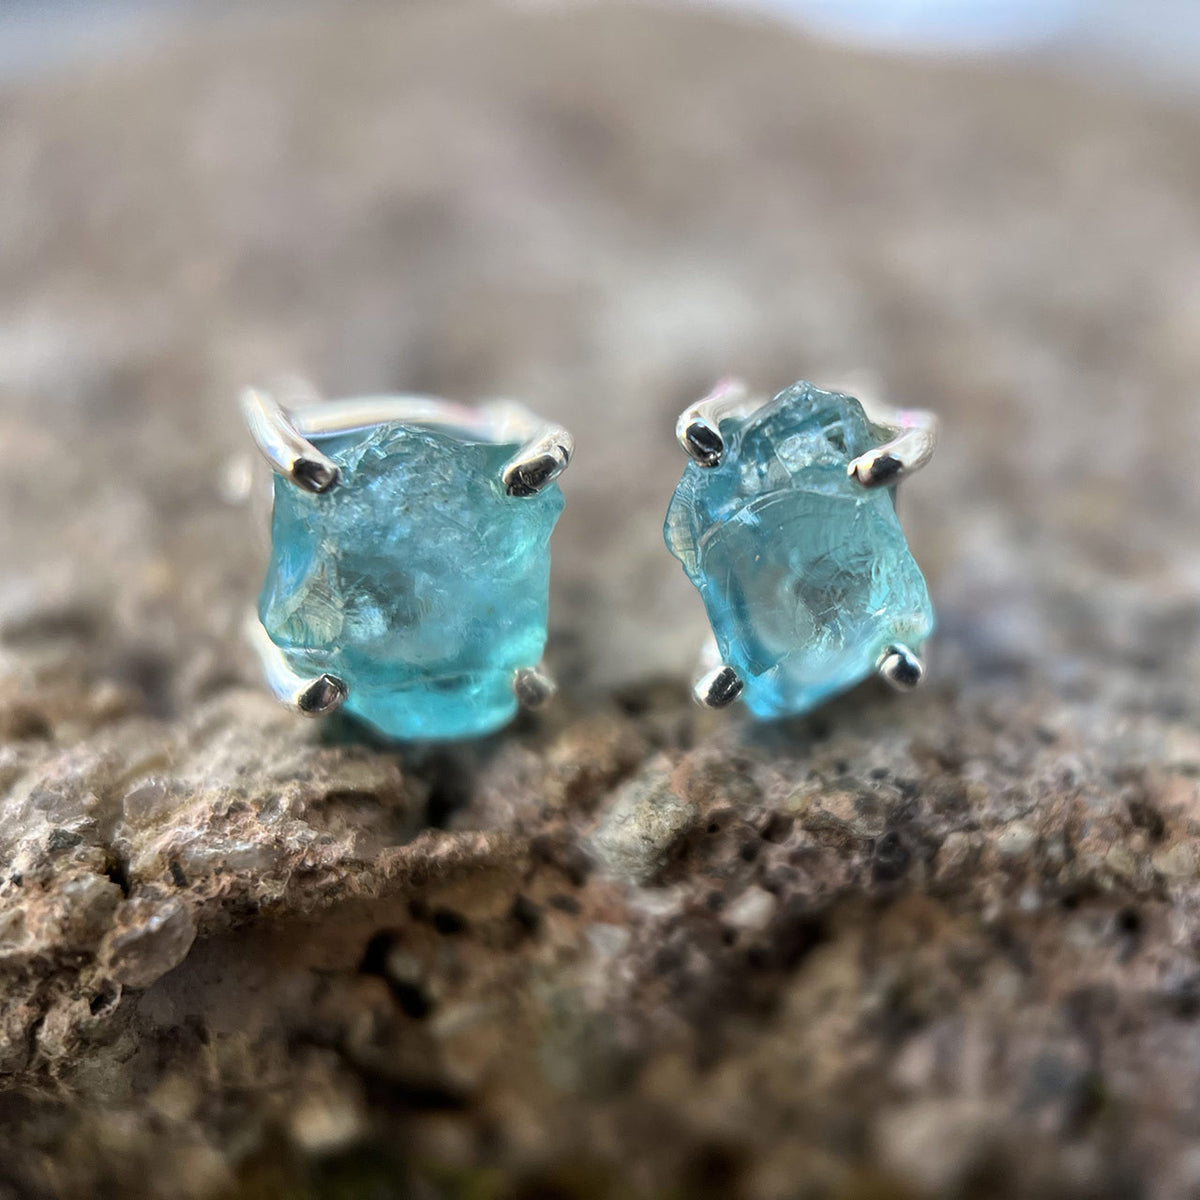 Apatite helps eliminate over-activity, under-activity, blockages, and congestion in all of the Chakras. It is excellent for balancing yin-yang, and for raising kundalini energy. Blue Apatite stimulates the Third Eye and the Throat Chakras.